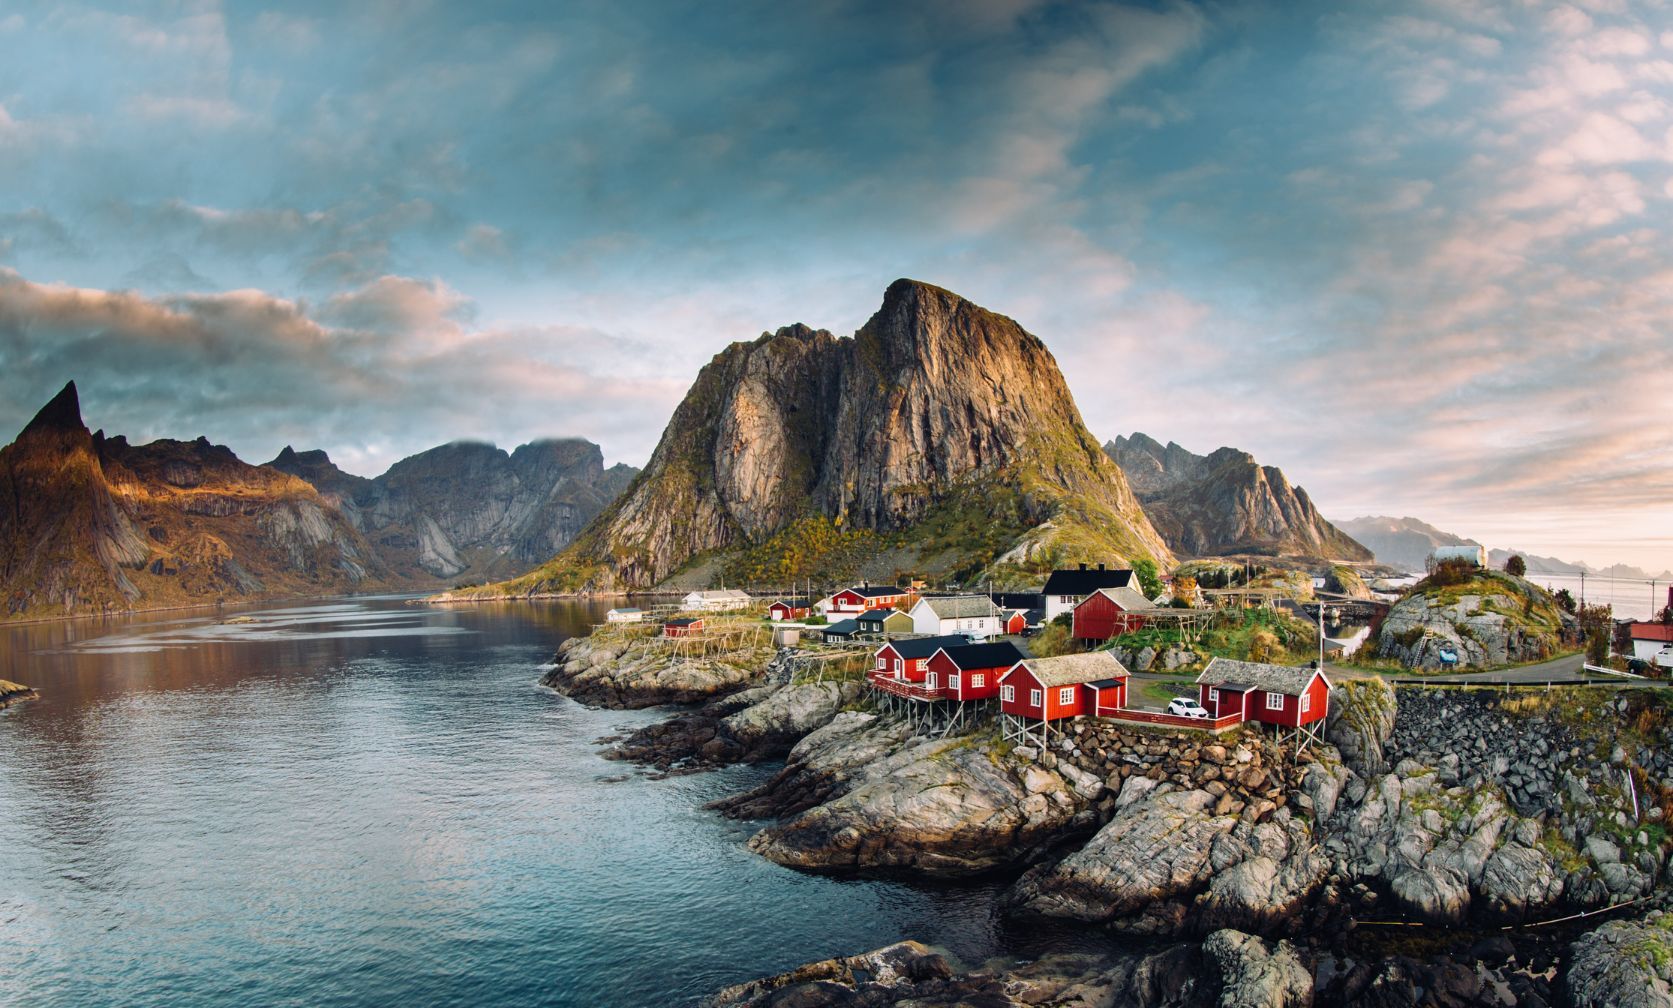 The jagged peaks and traditional fishing villages of the Lofoten Islands, Norway. Photo: Getty.